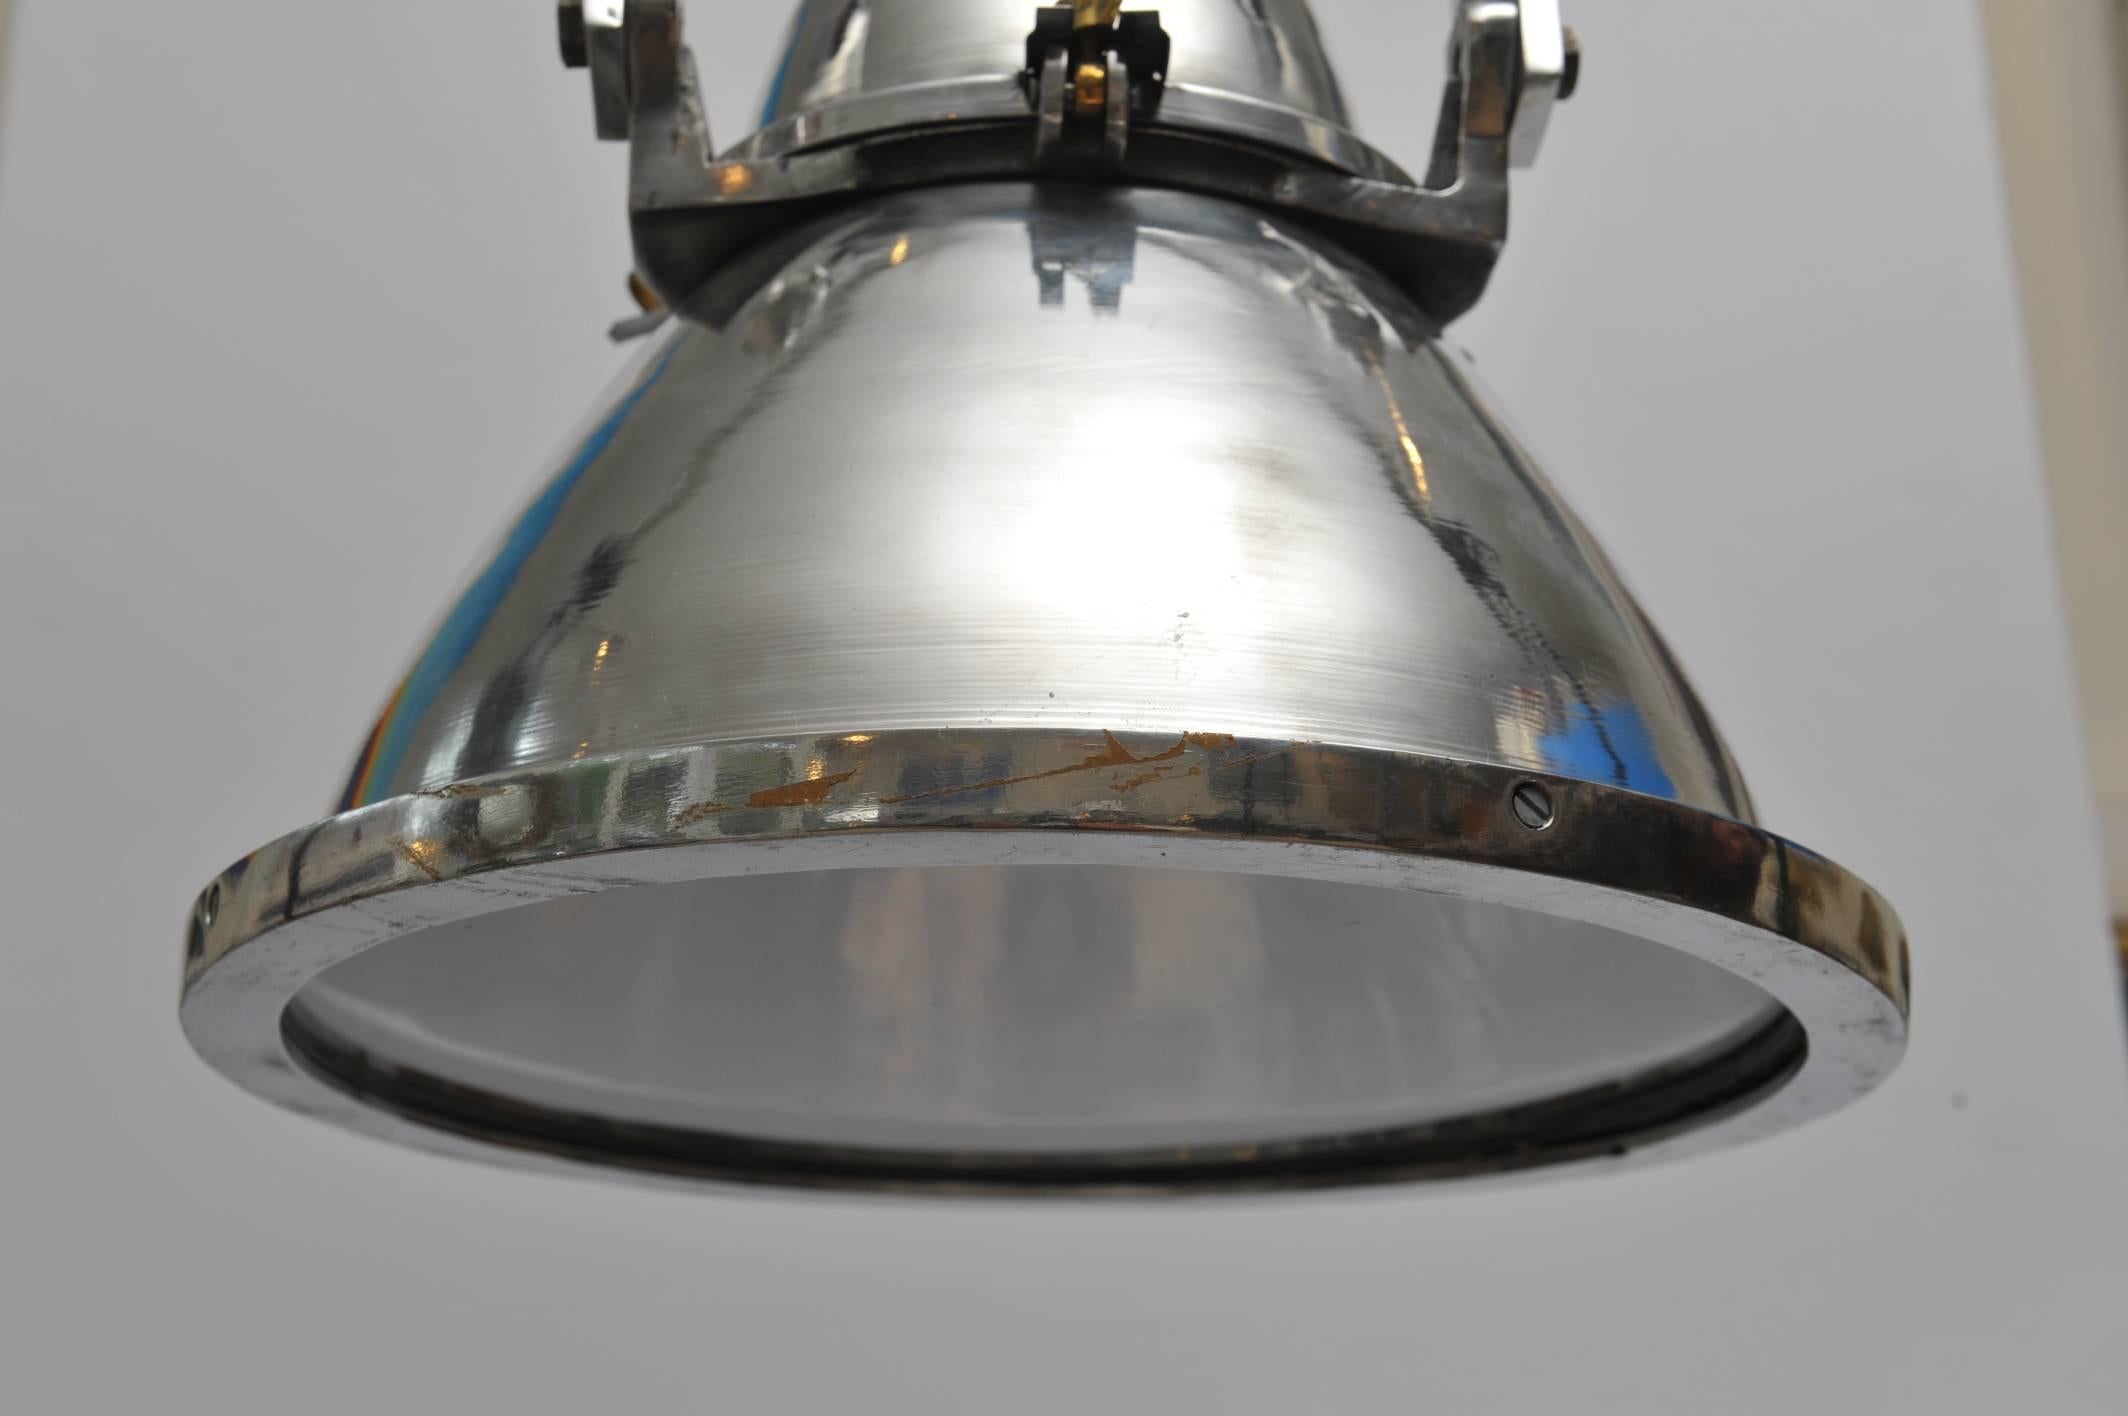 A chrome deck light from a working ship, with an iron bracket which is slightly offset but stays center when you hang it. Mid-century. Rewired for American use and takes one standard base light bulb. The light itself is 19 inches tall without the